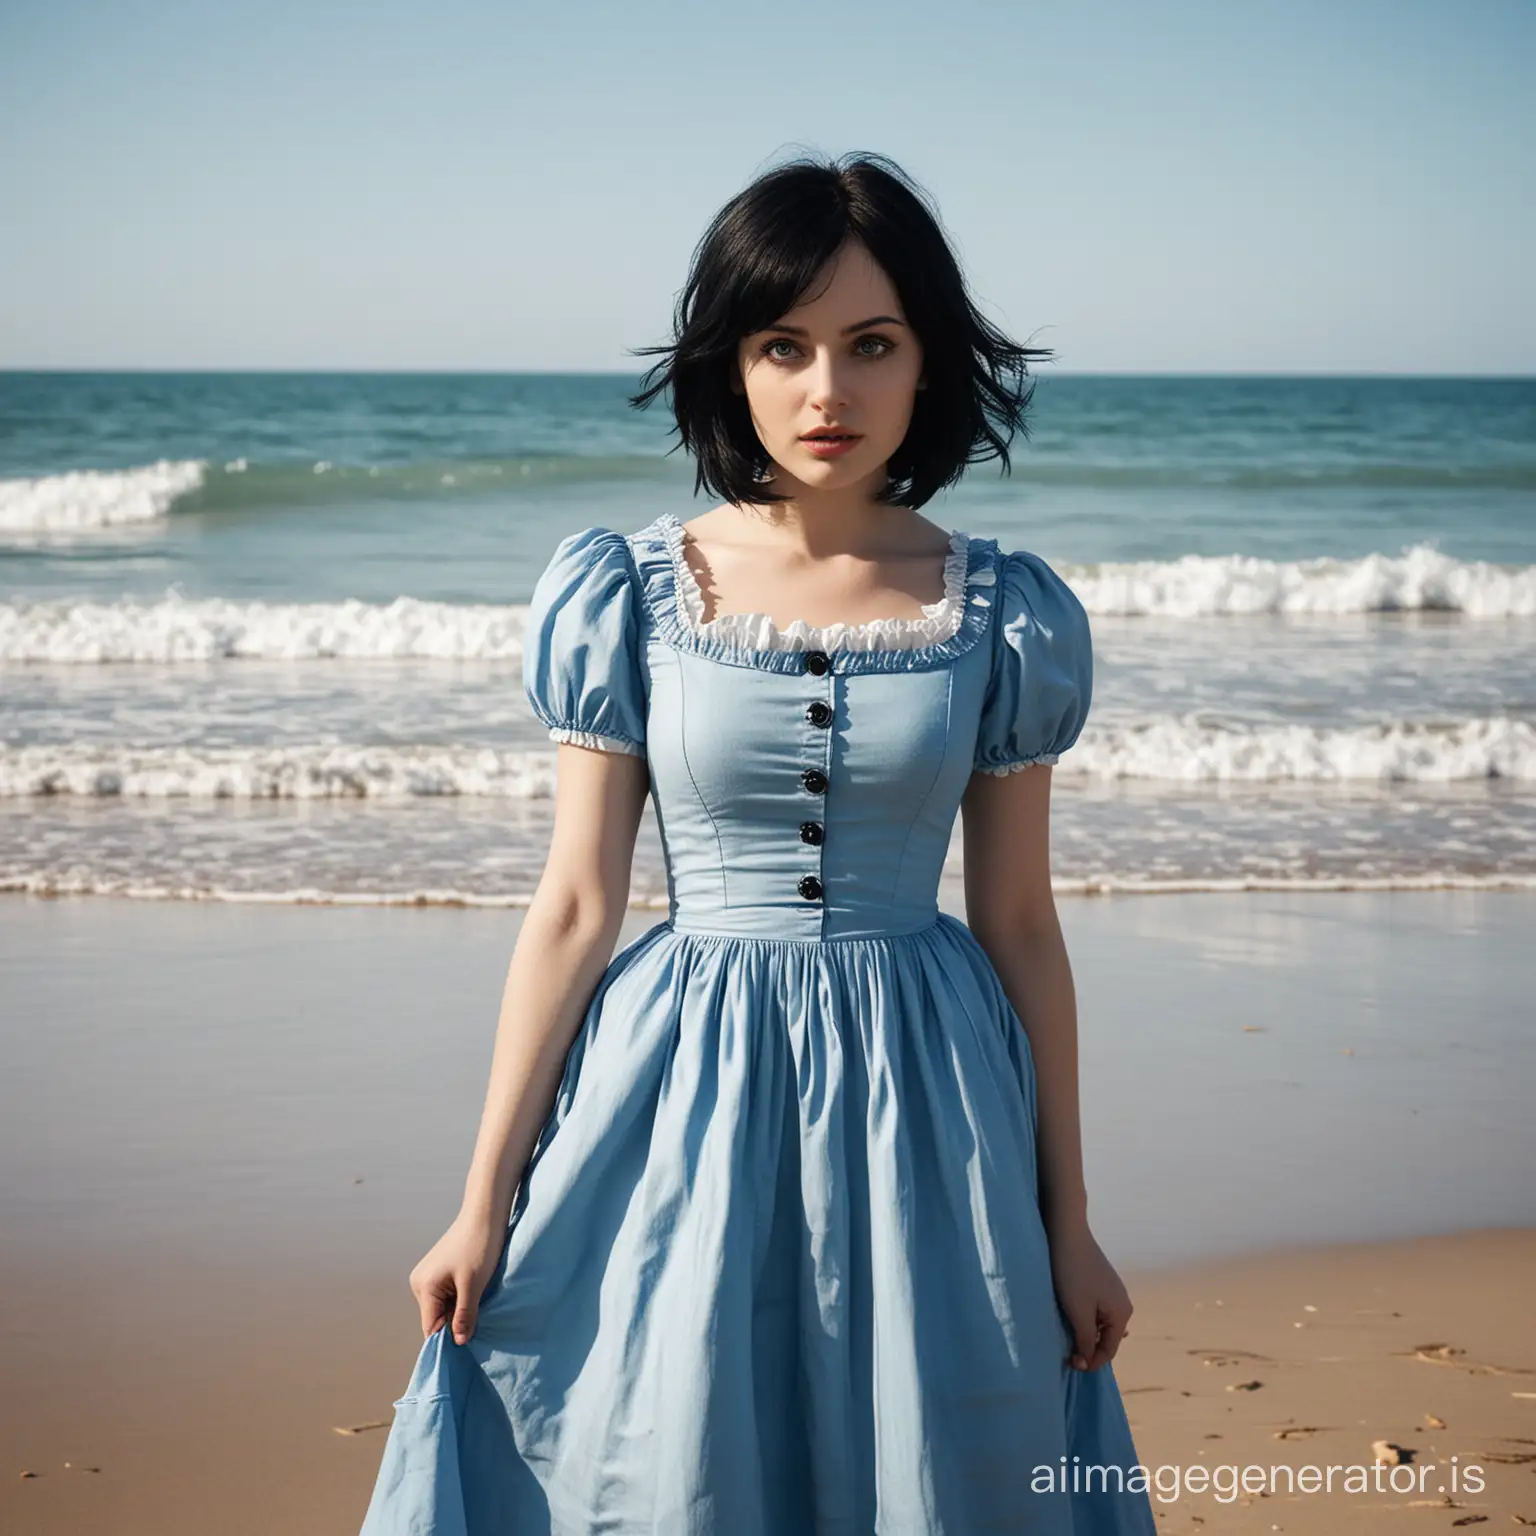 alice in wonderland with black bob in blue dress madness returns at a beach